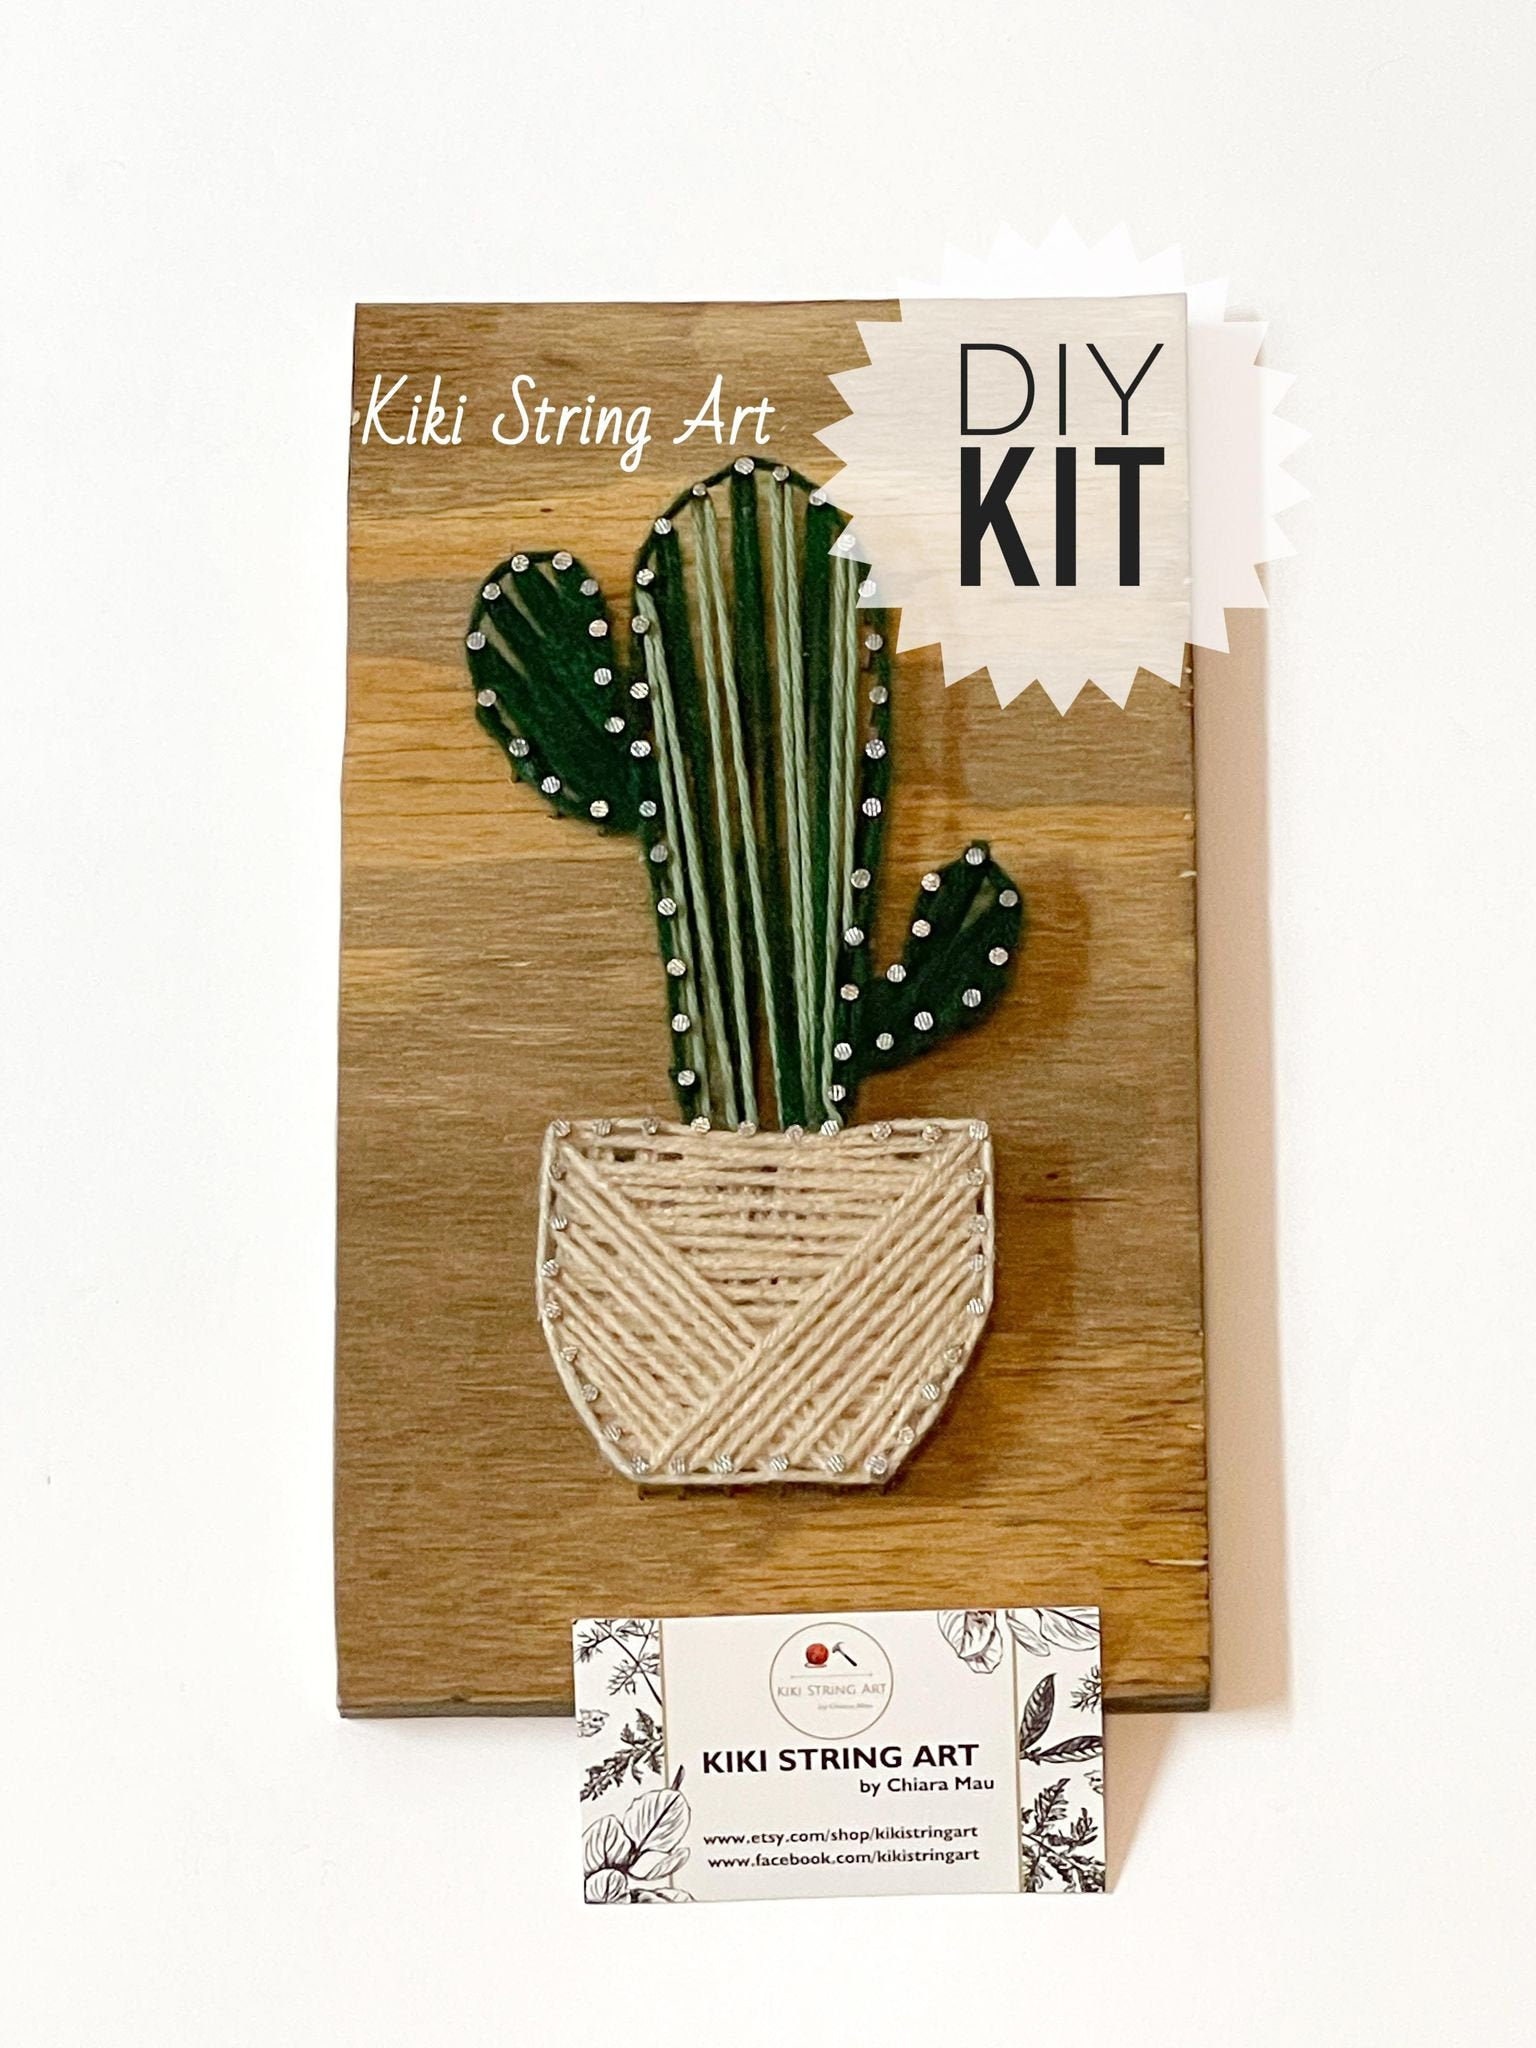 FAUX 10pc Precut Stained Glass Kit for Adults Skill Level 1 Cactus  Suncatcher DIY Kits for Adults No Stained Glass Grinder Needed 